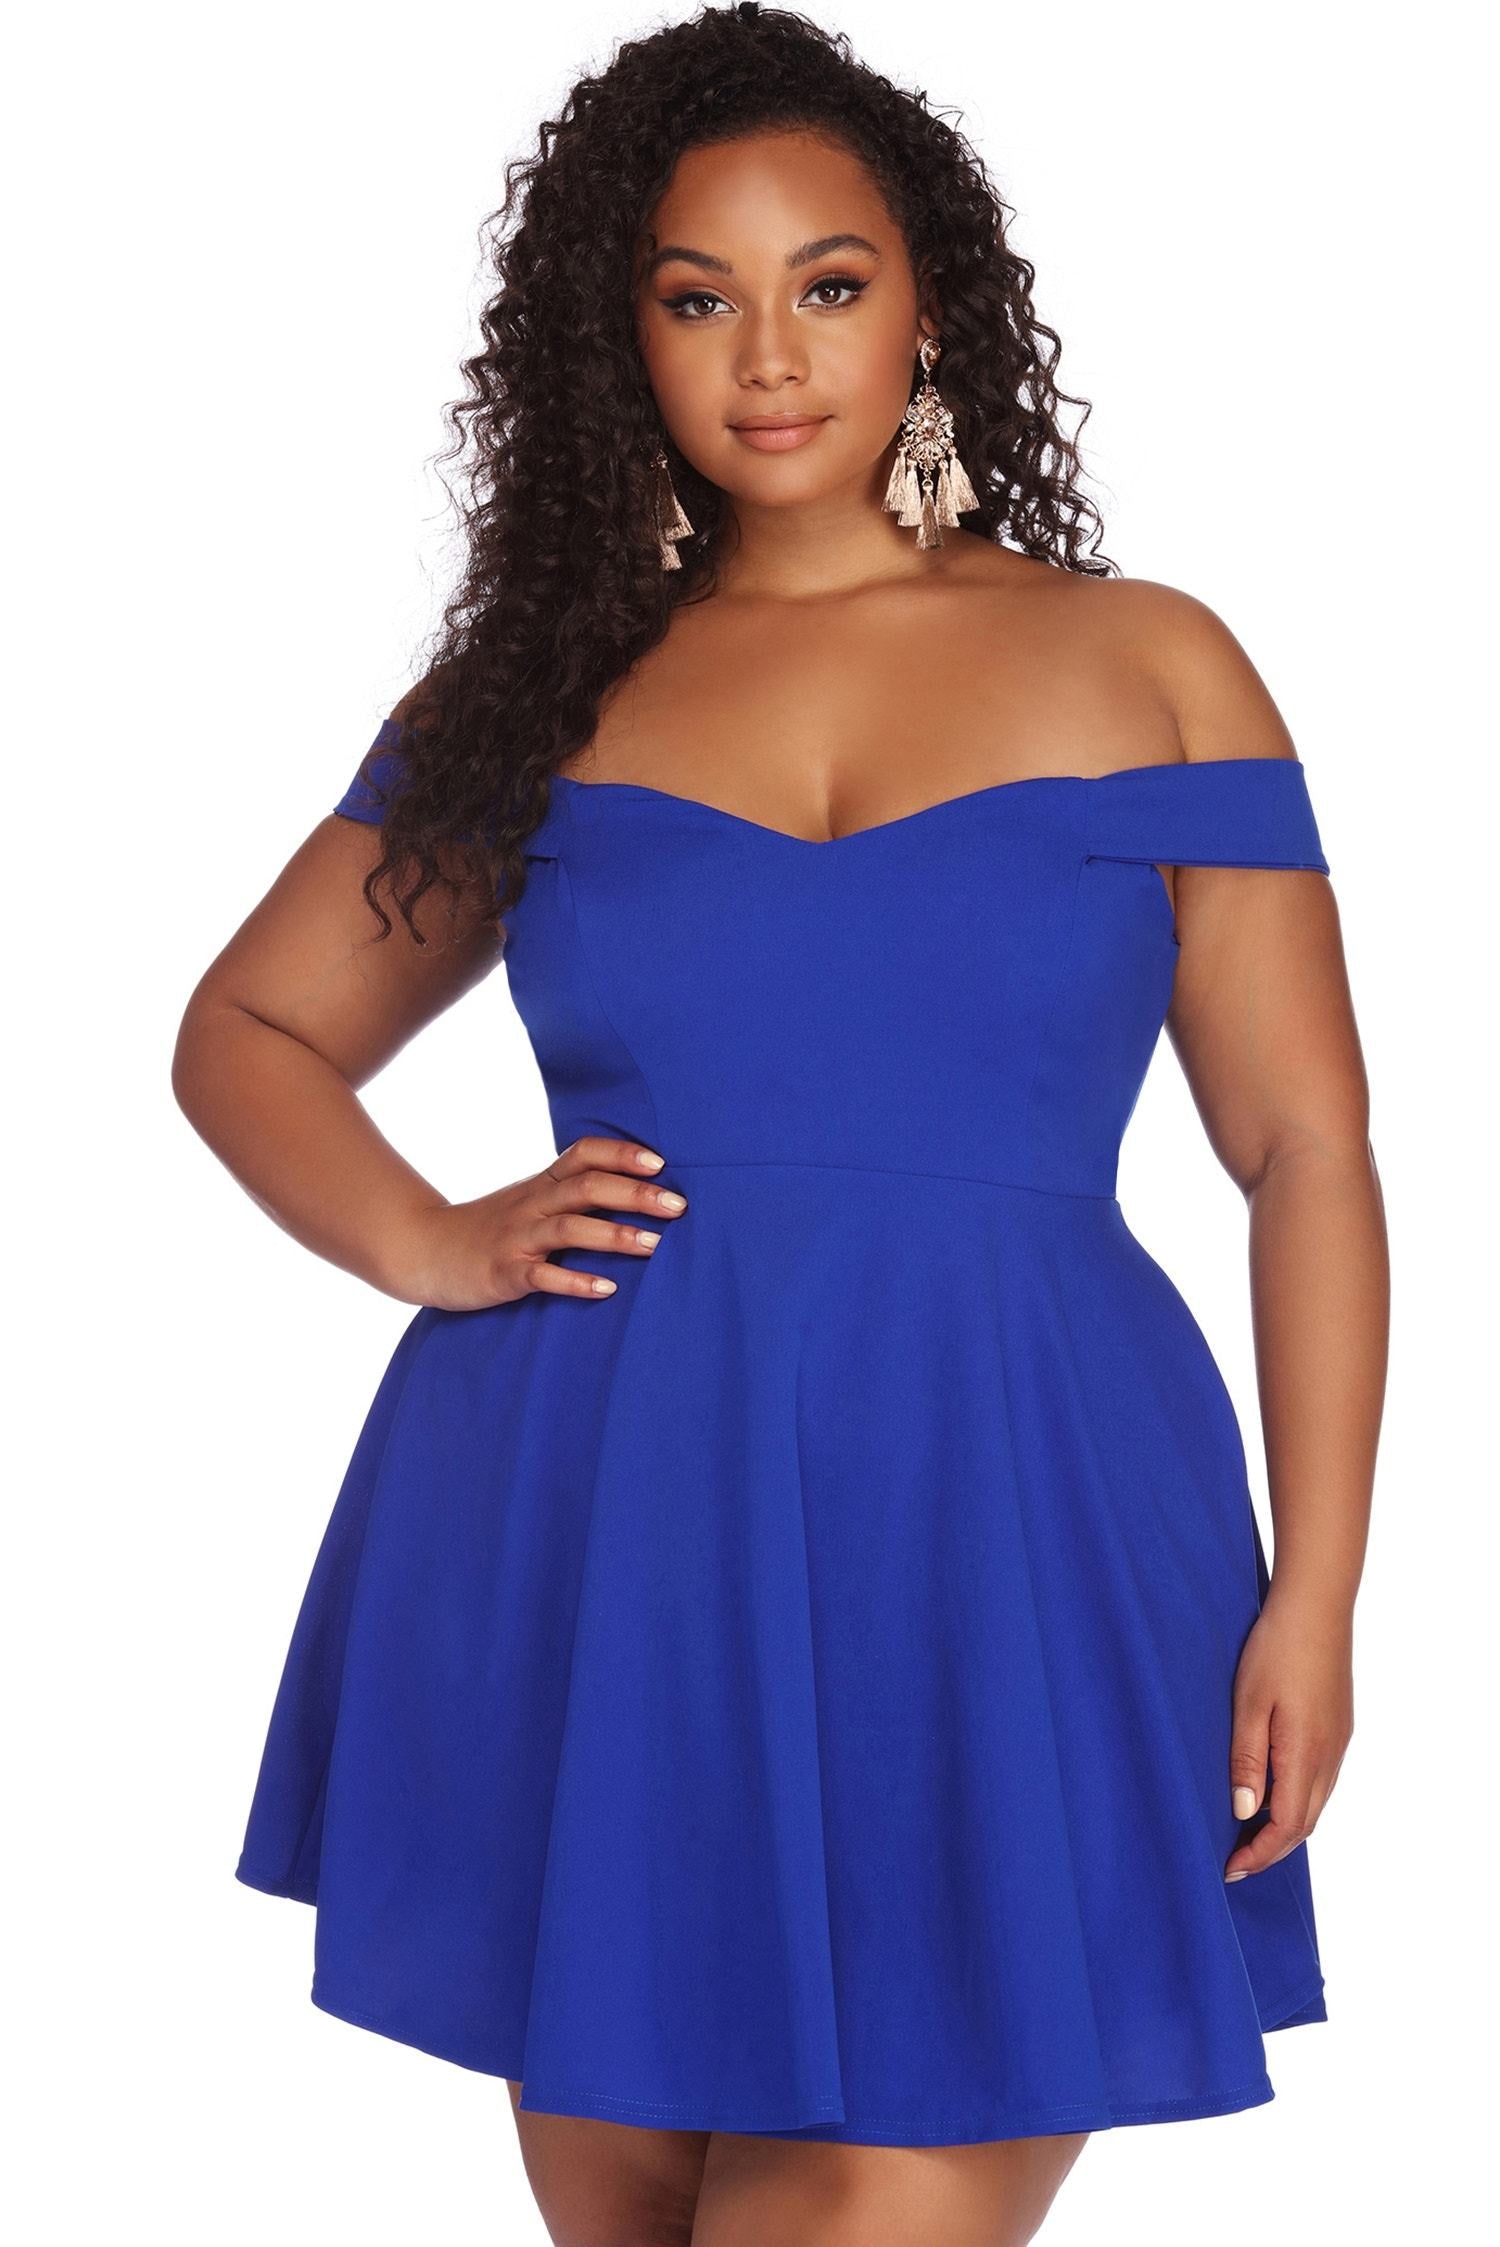 Plus Charming Sweetheart Skater Dress - Lady Occasions